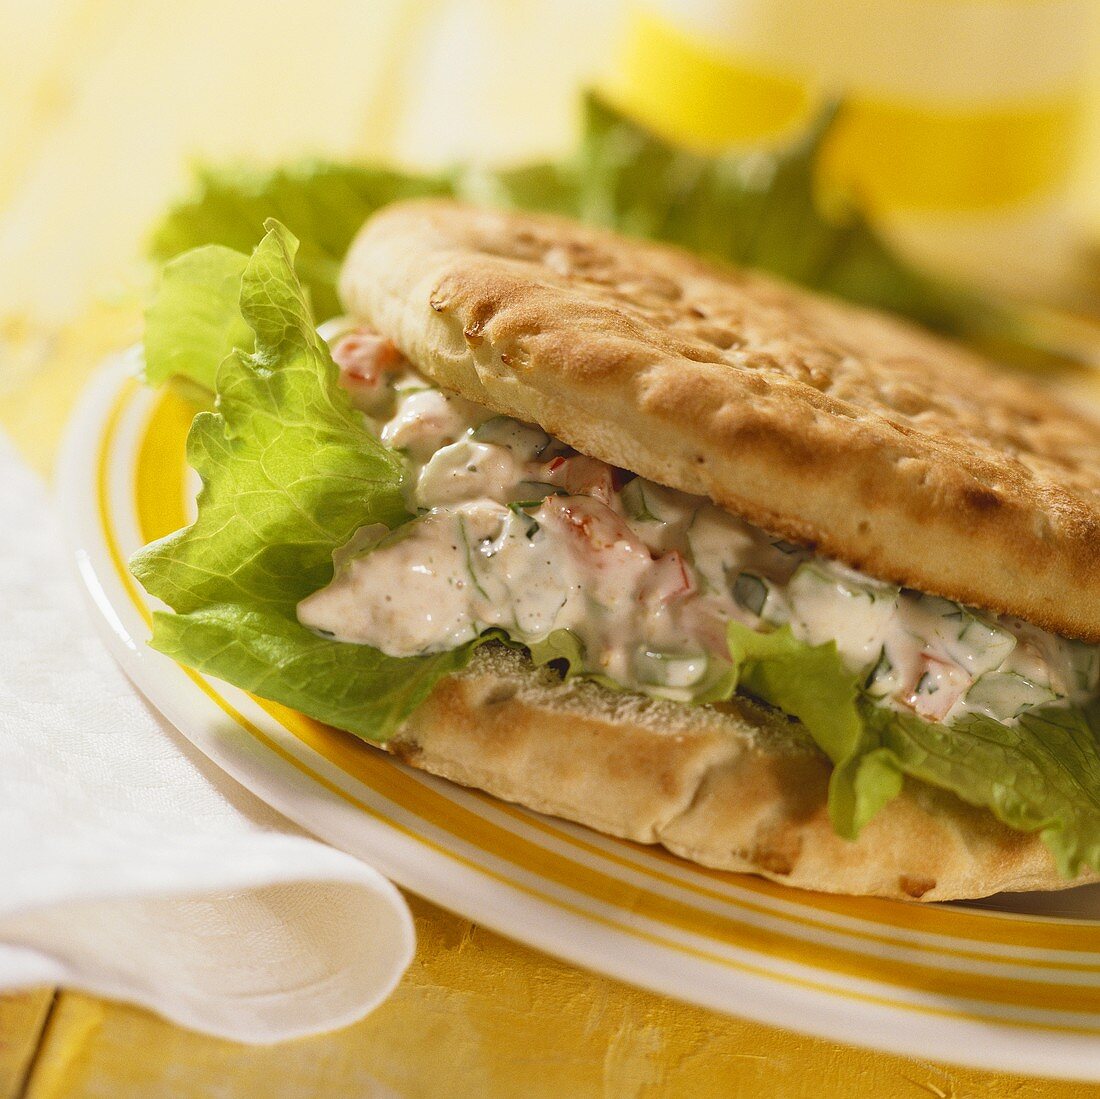 Filled pitta bread with tuna and salad leaves